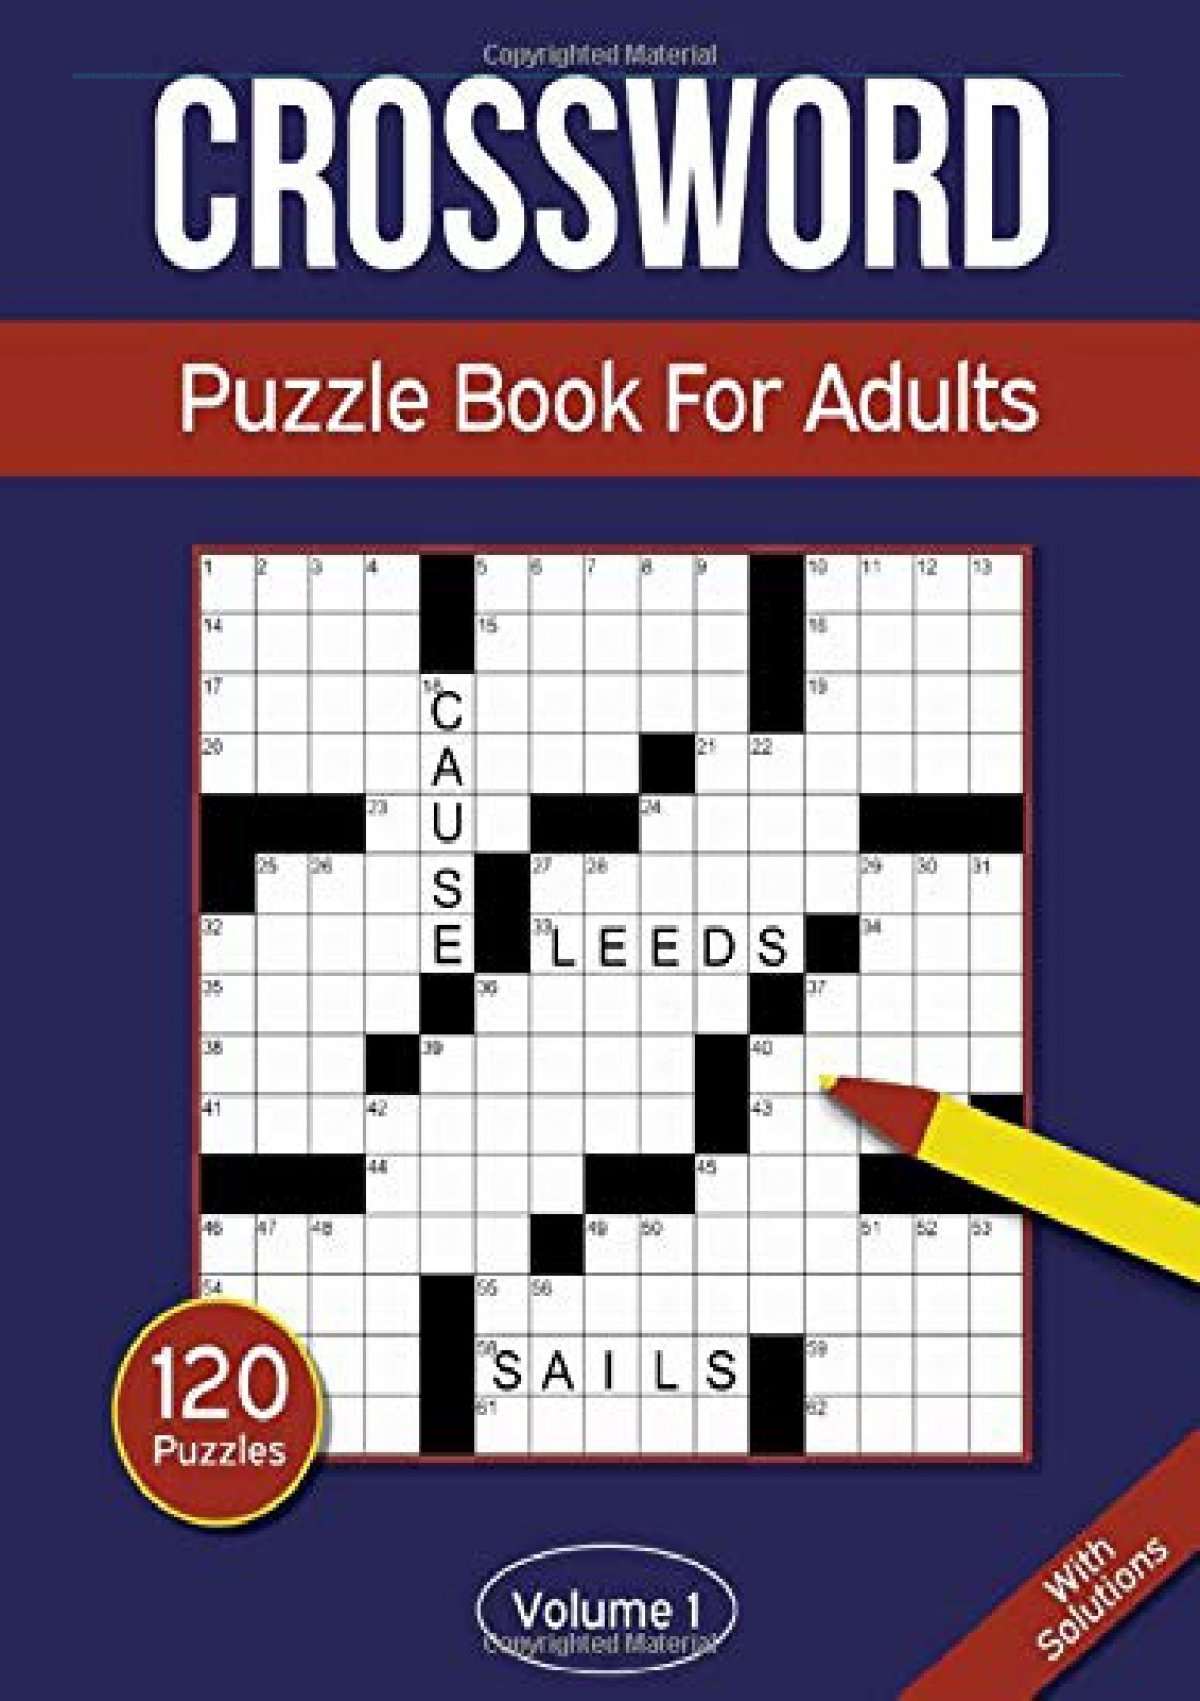 pdf-crossword-puzzle-book-for-adults-120-crossword-puzzles-for